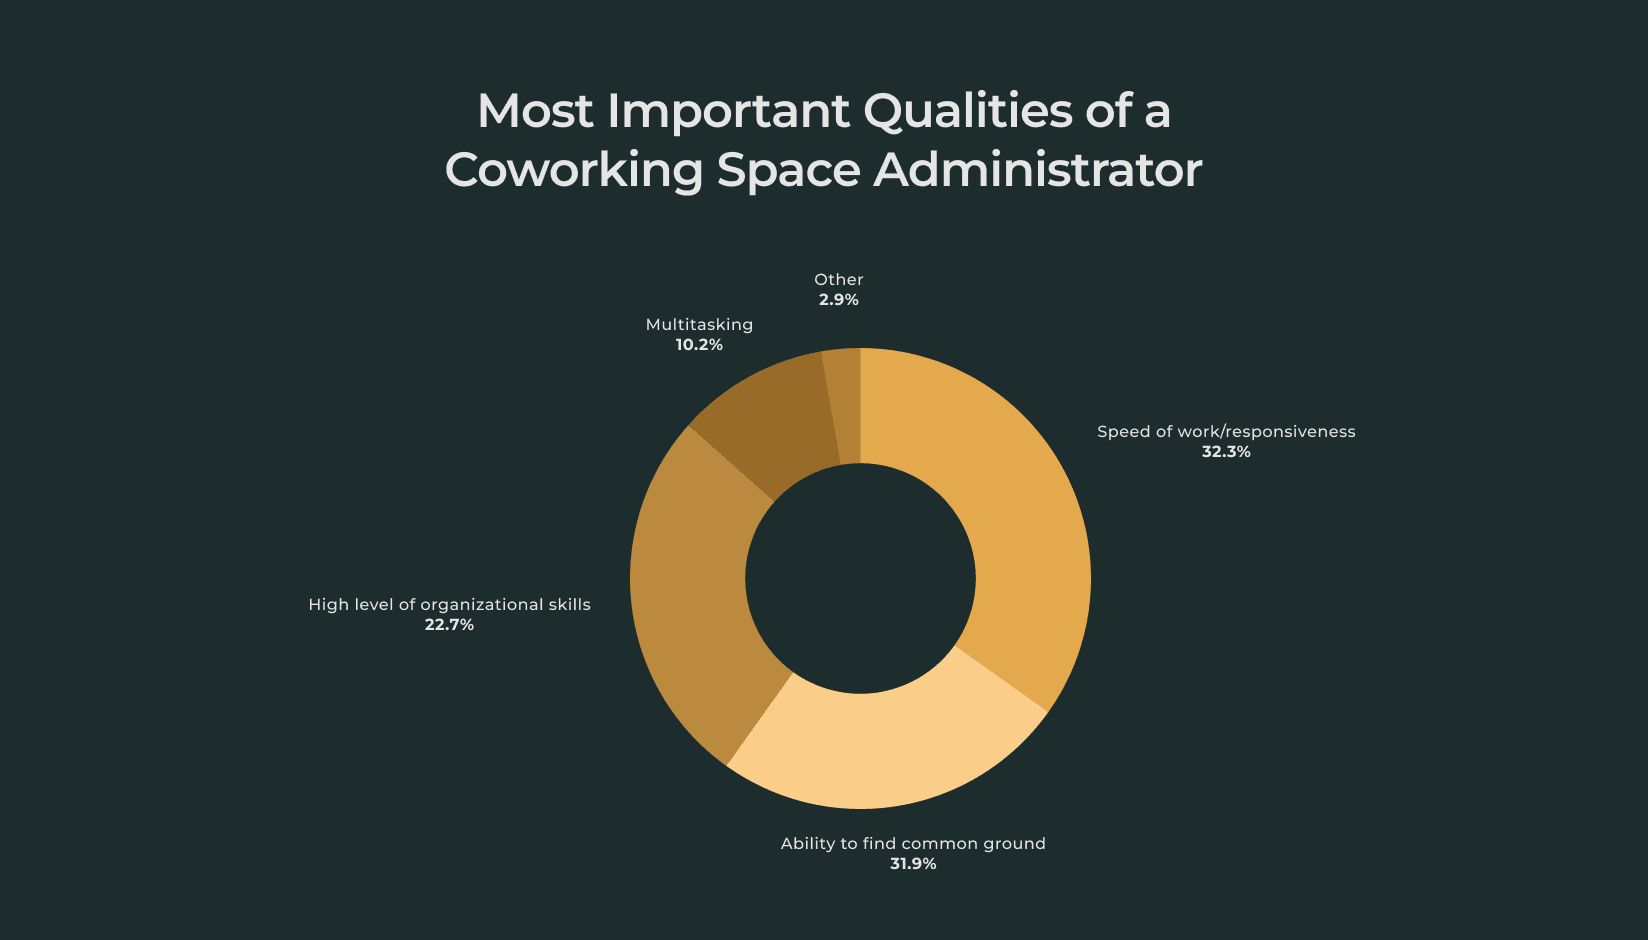 Most important qualities of coworking space administrators - Spacebring survey